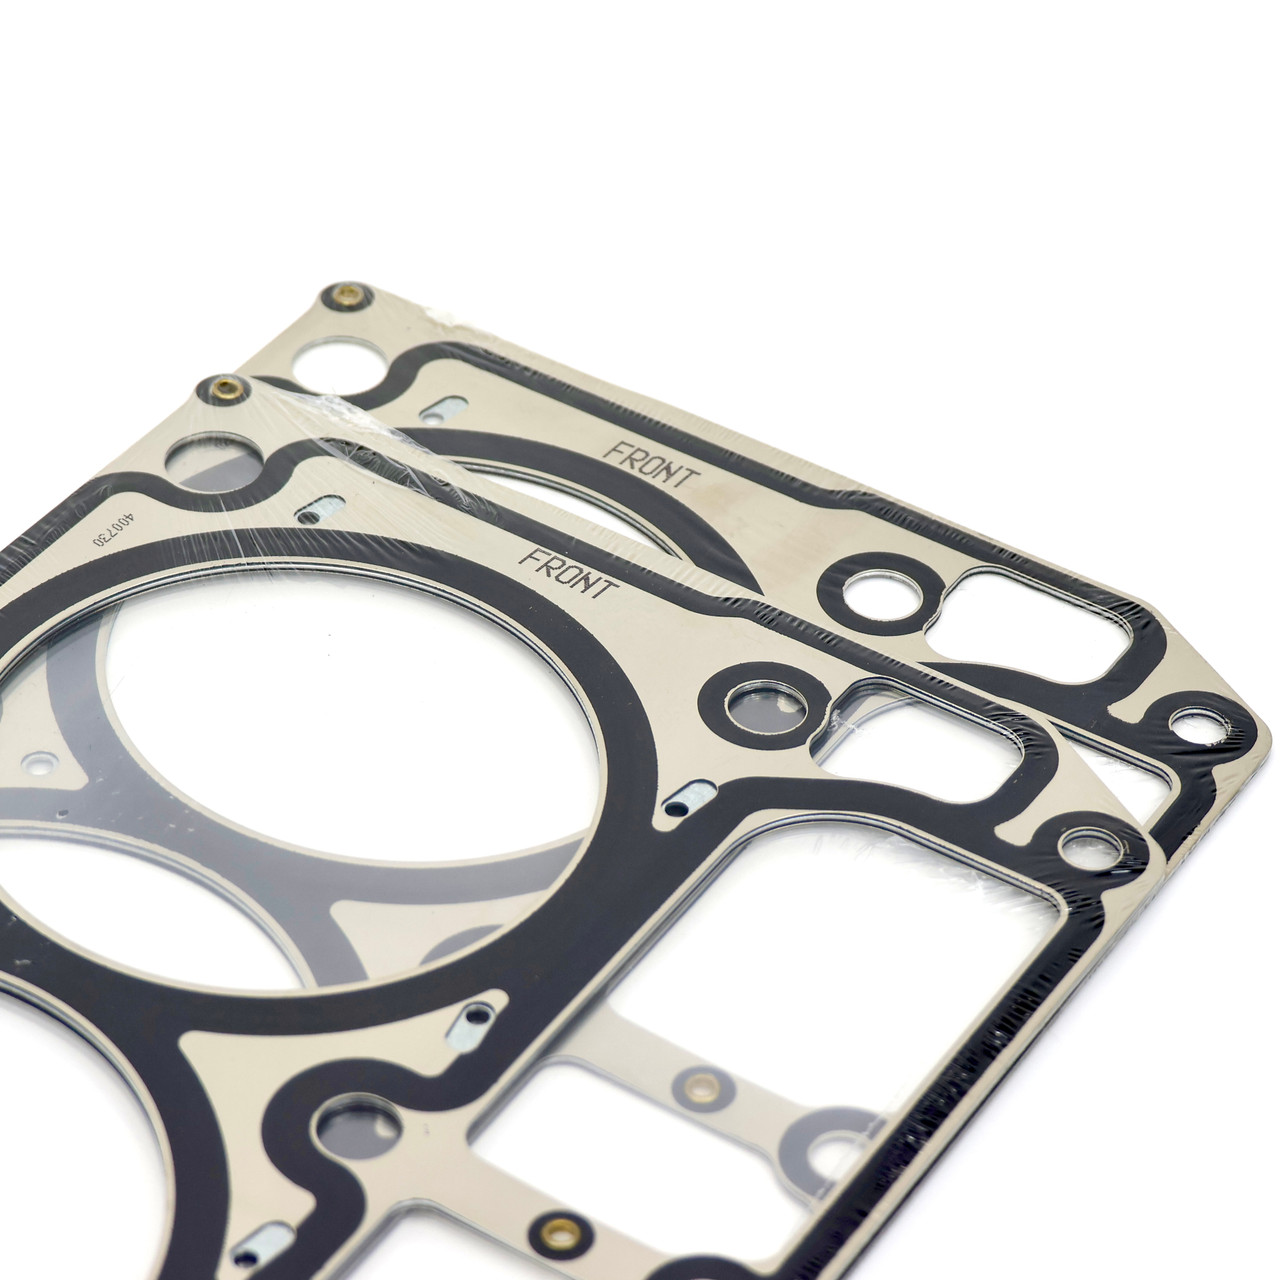 MLS Head Gasket for early Notched LS1 and LS Truck Heads 4.8L 5.3L 5.7L 806  853 862 Michigan Motorsports